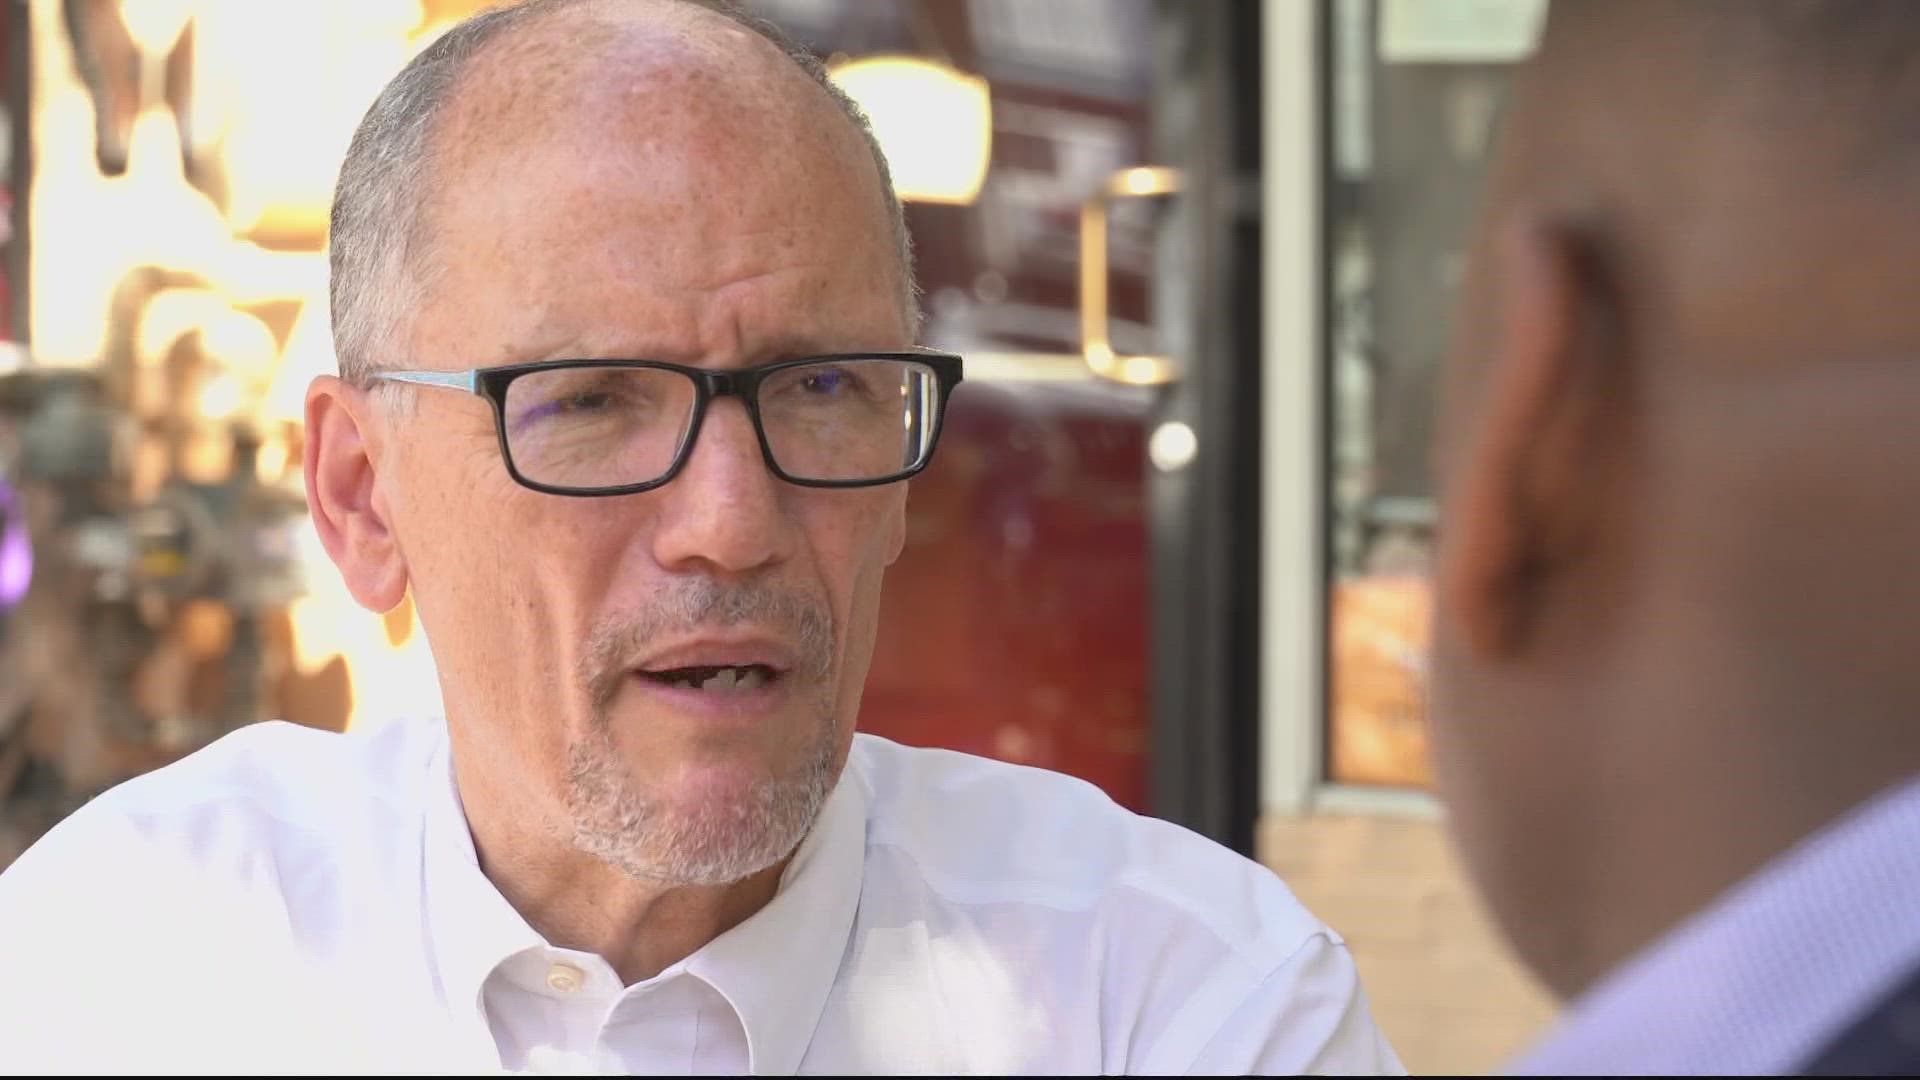 As one of the leading Democratic candidates in Maryland's gubernatorial race, Tom Perez says his legal and government experience make him the right person to lead.